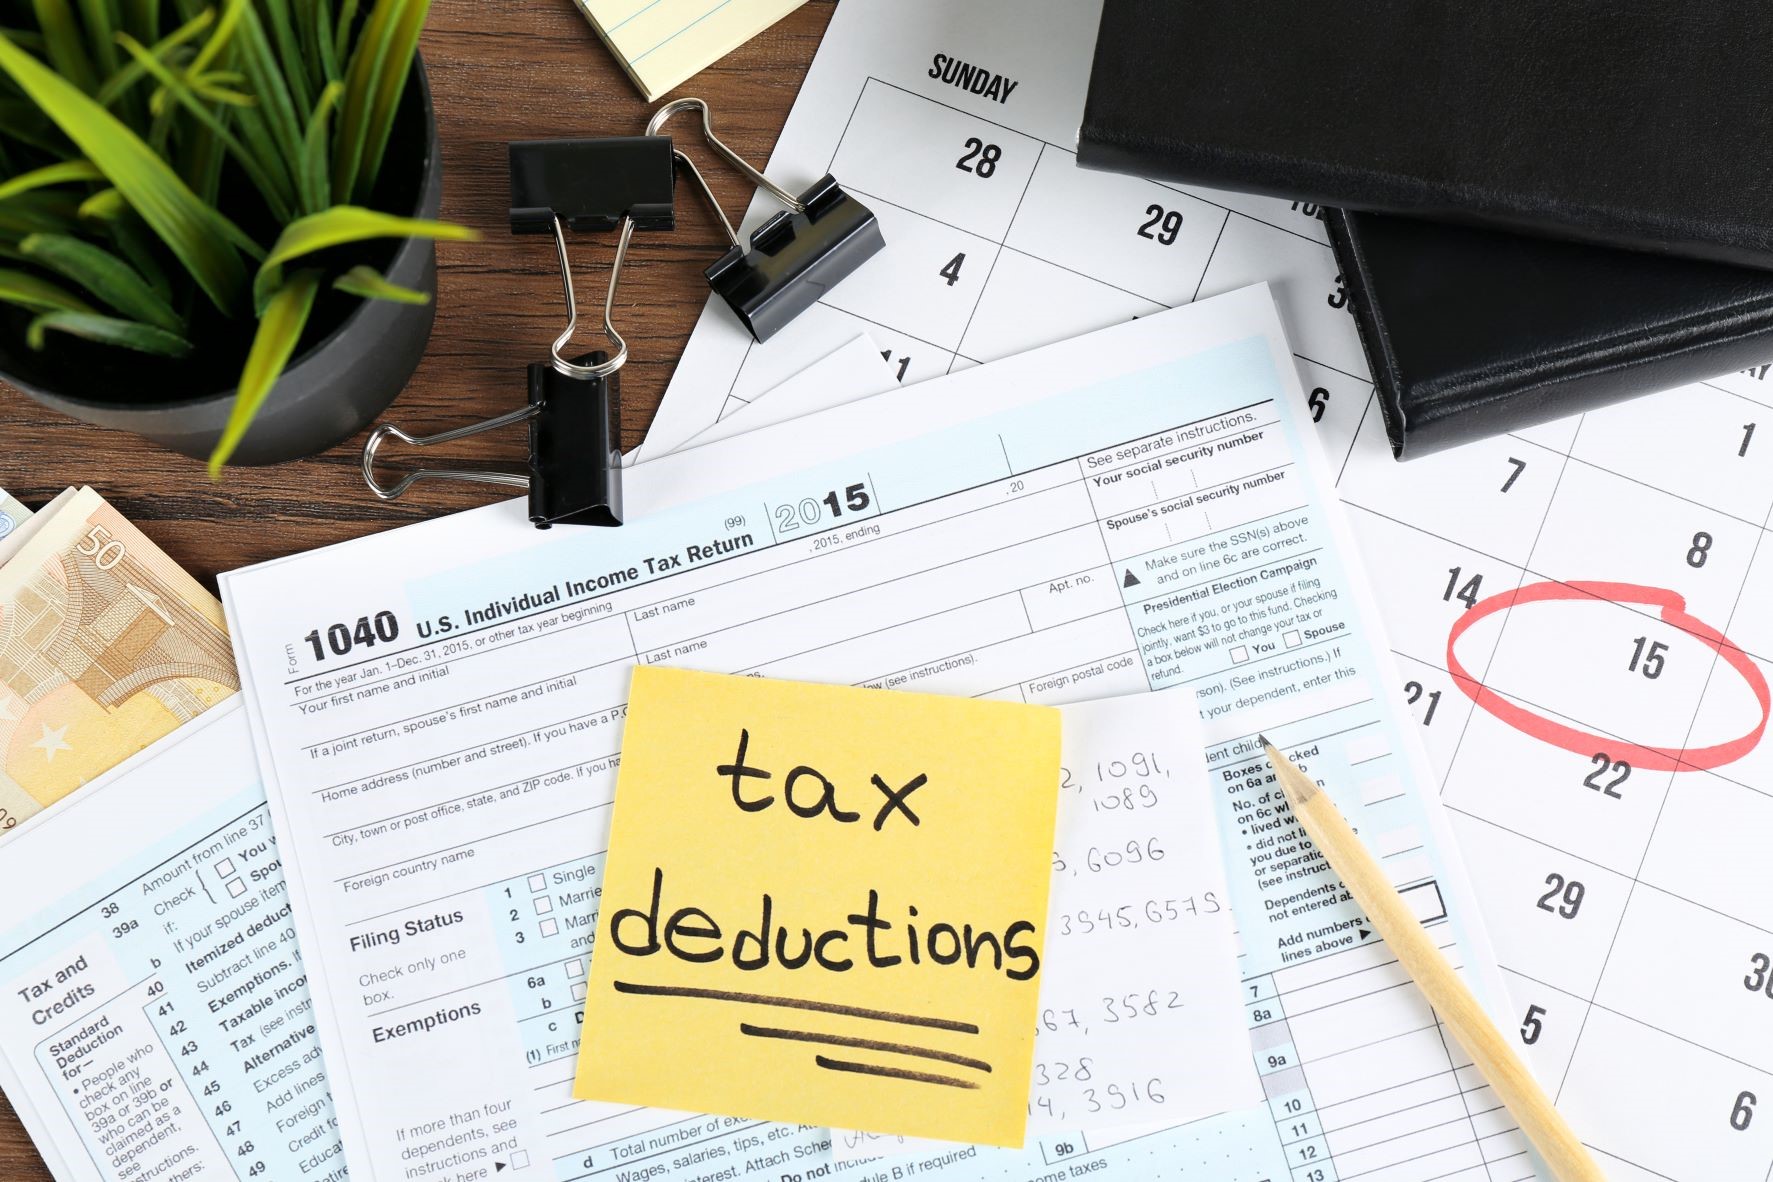 tax deductions banner